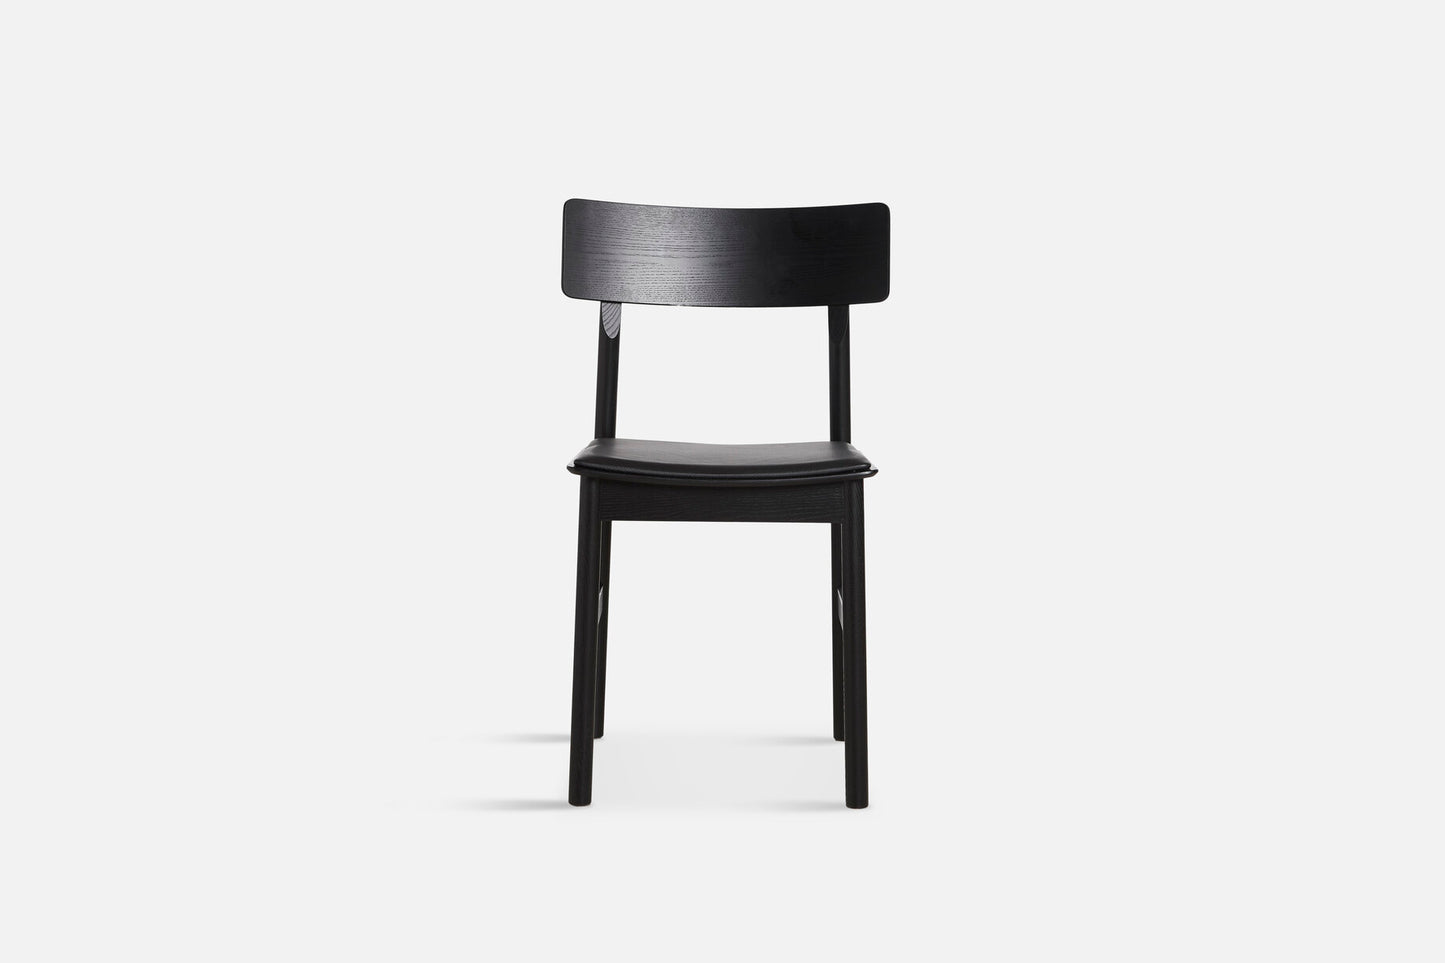 Pause Chair 2.0 with Leather by Woud